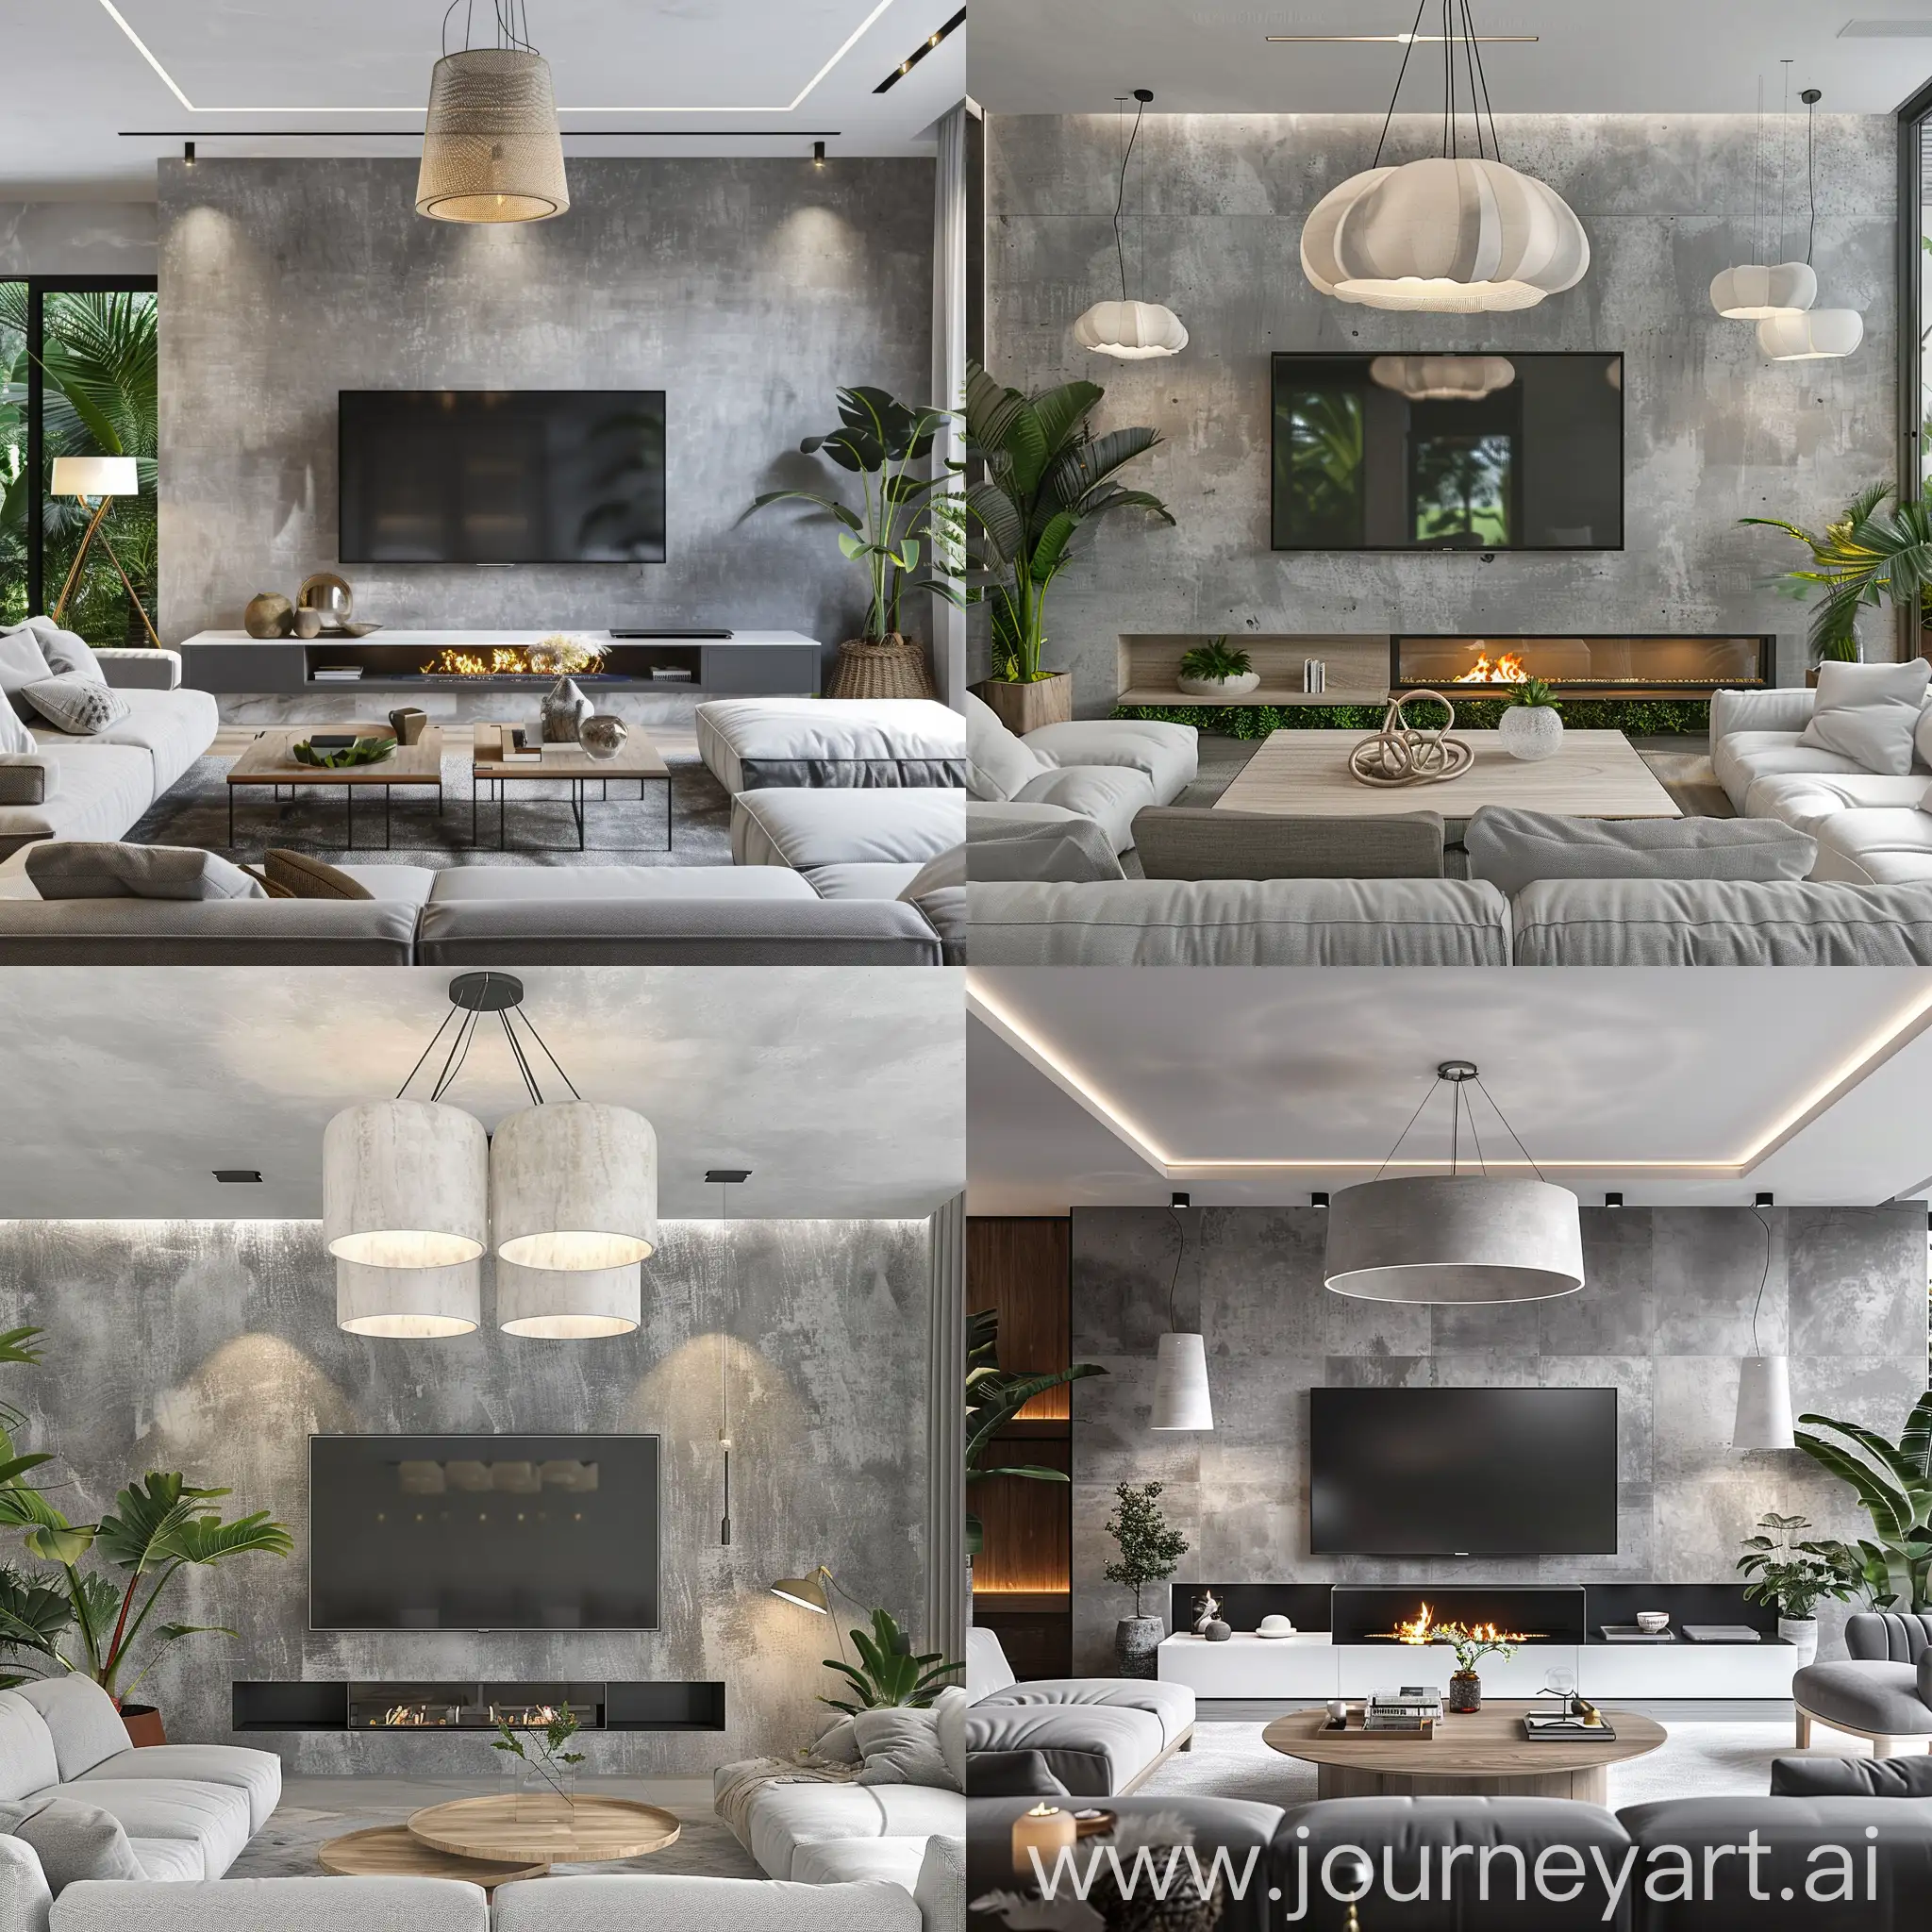 A modern gray and white thermowood living room
Complete furniture set, a TV wall with plaster wall, modern decoration, large modern chandelier and lampshade, soft lighting, landscaping, fireplace, in the green tropical forest, cloudy weather, real photo
